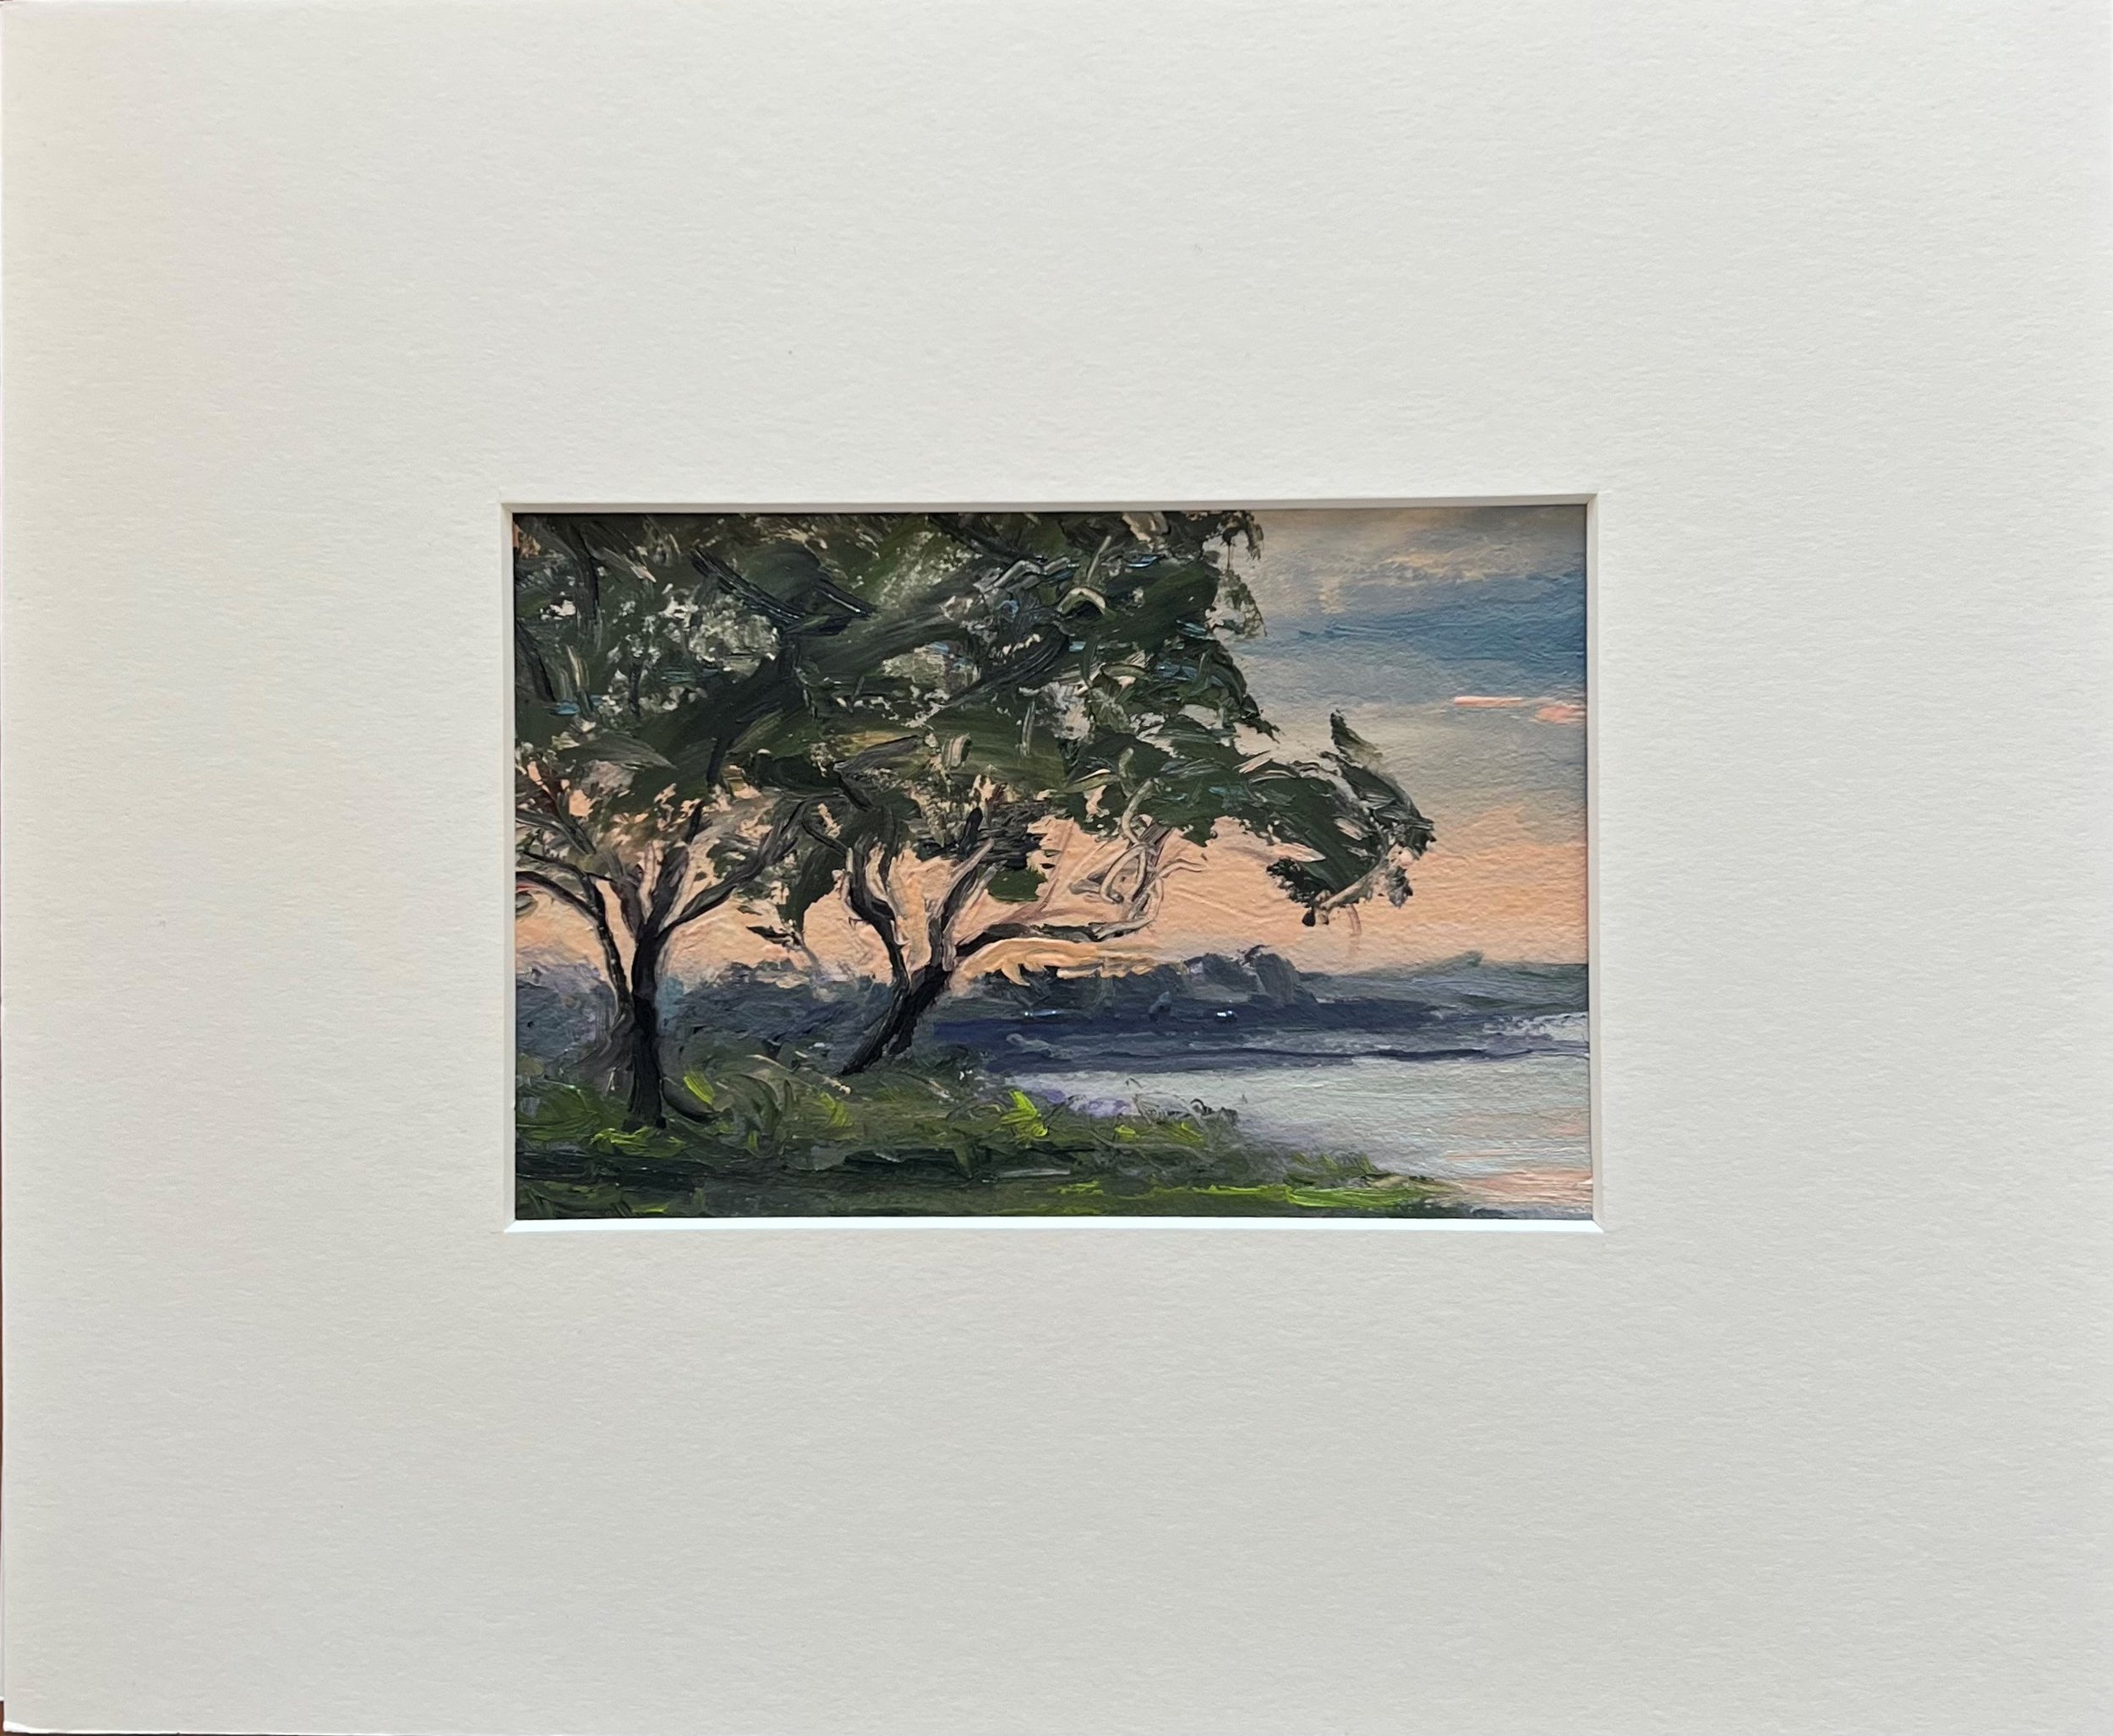 2022-07 Stony Creek Trees-Soupy Sunset   Oil on Gesso Paper  12x14 inch mat   Window cut to 5x7 inches  Stony Creek, CT  .jpg